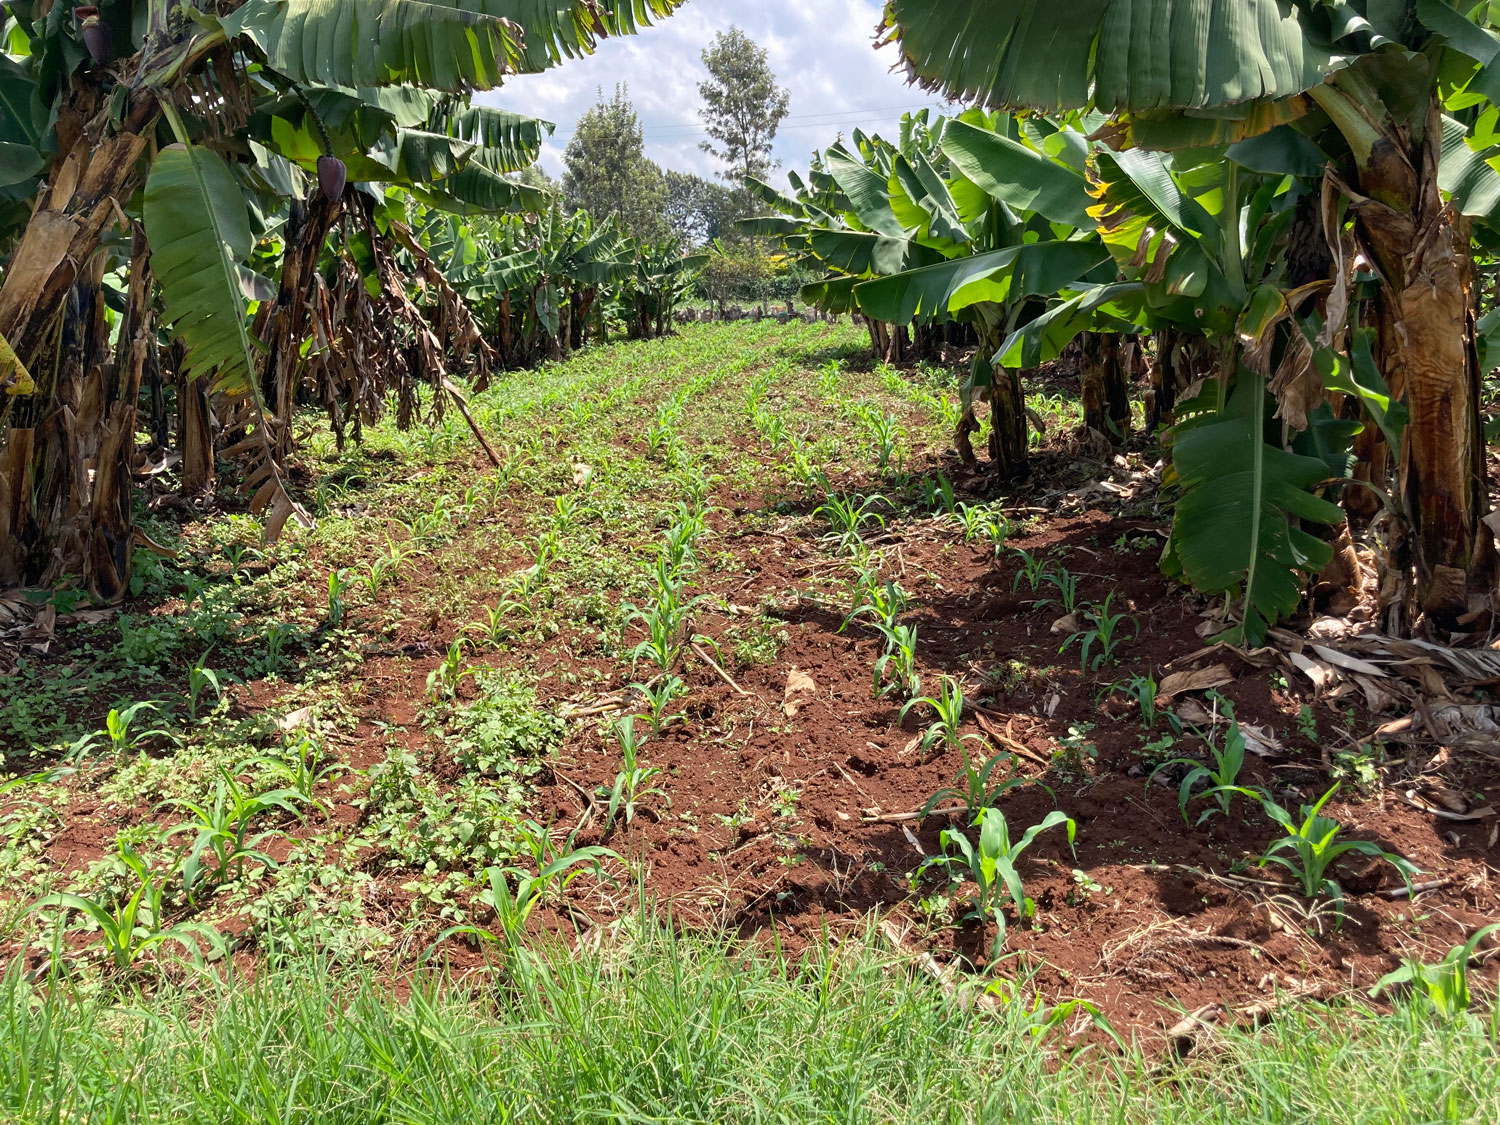 Small scale, mixed-cropping in Kenya